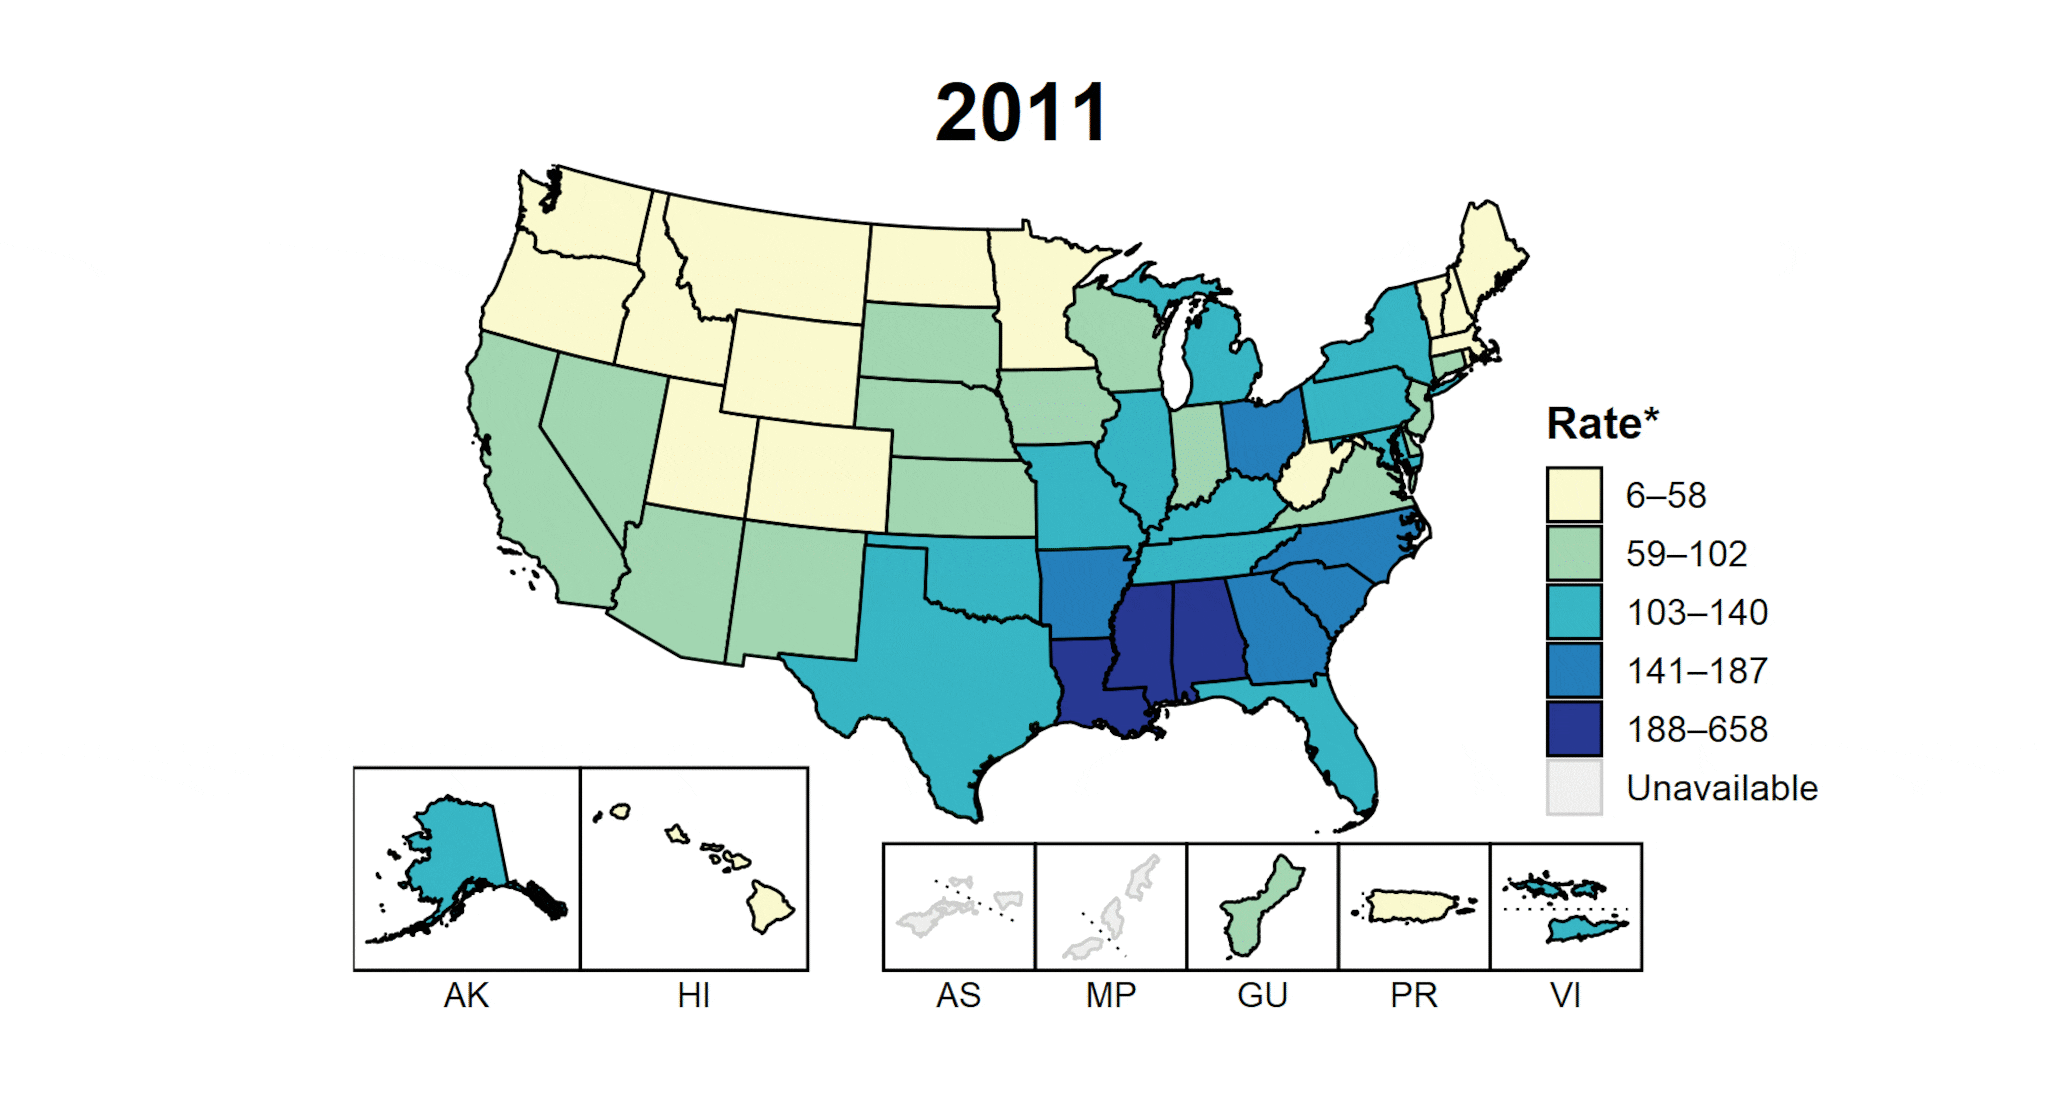 Animated United States map showing reported rates of gonorrhea  by state from 2011 to 2020